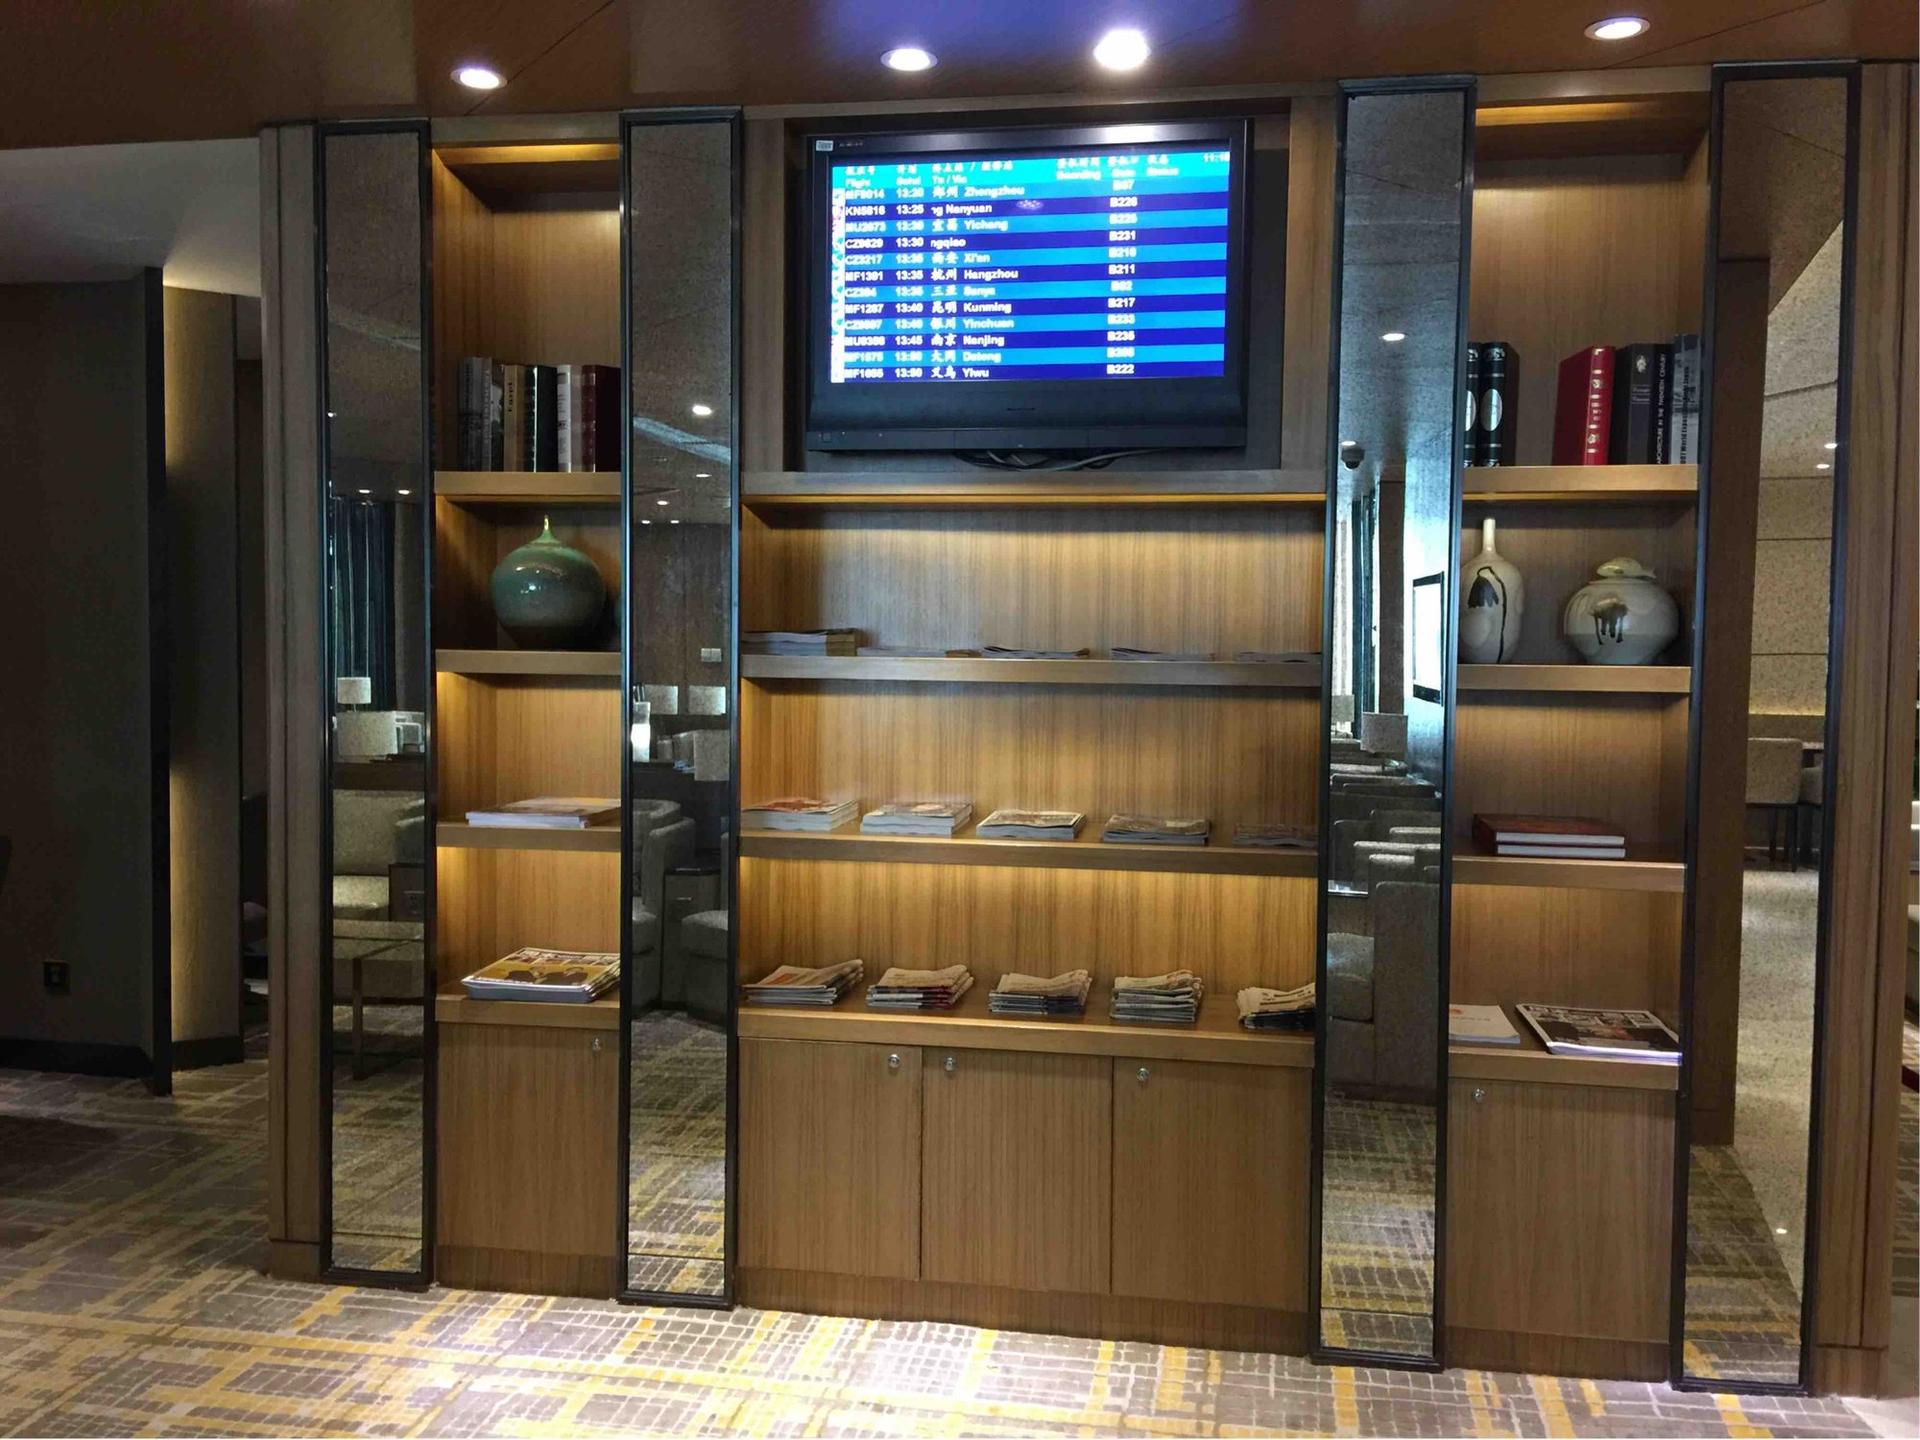 Baiyun Airport First Class Lounge (Closed For Renovation) image 5 of 10